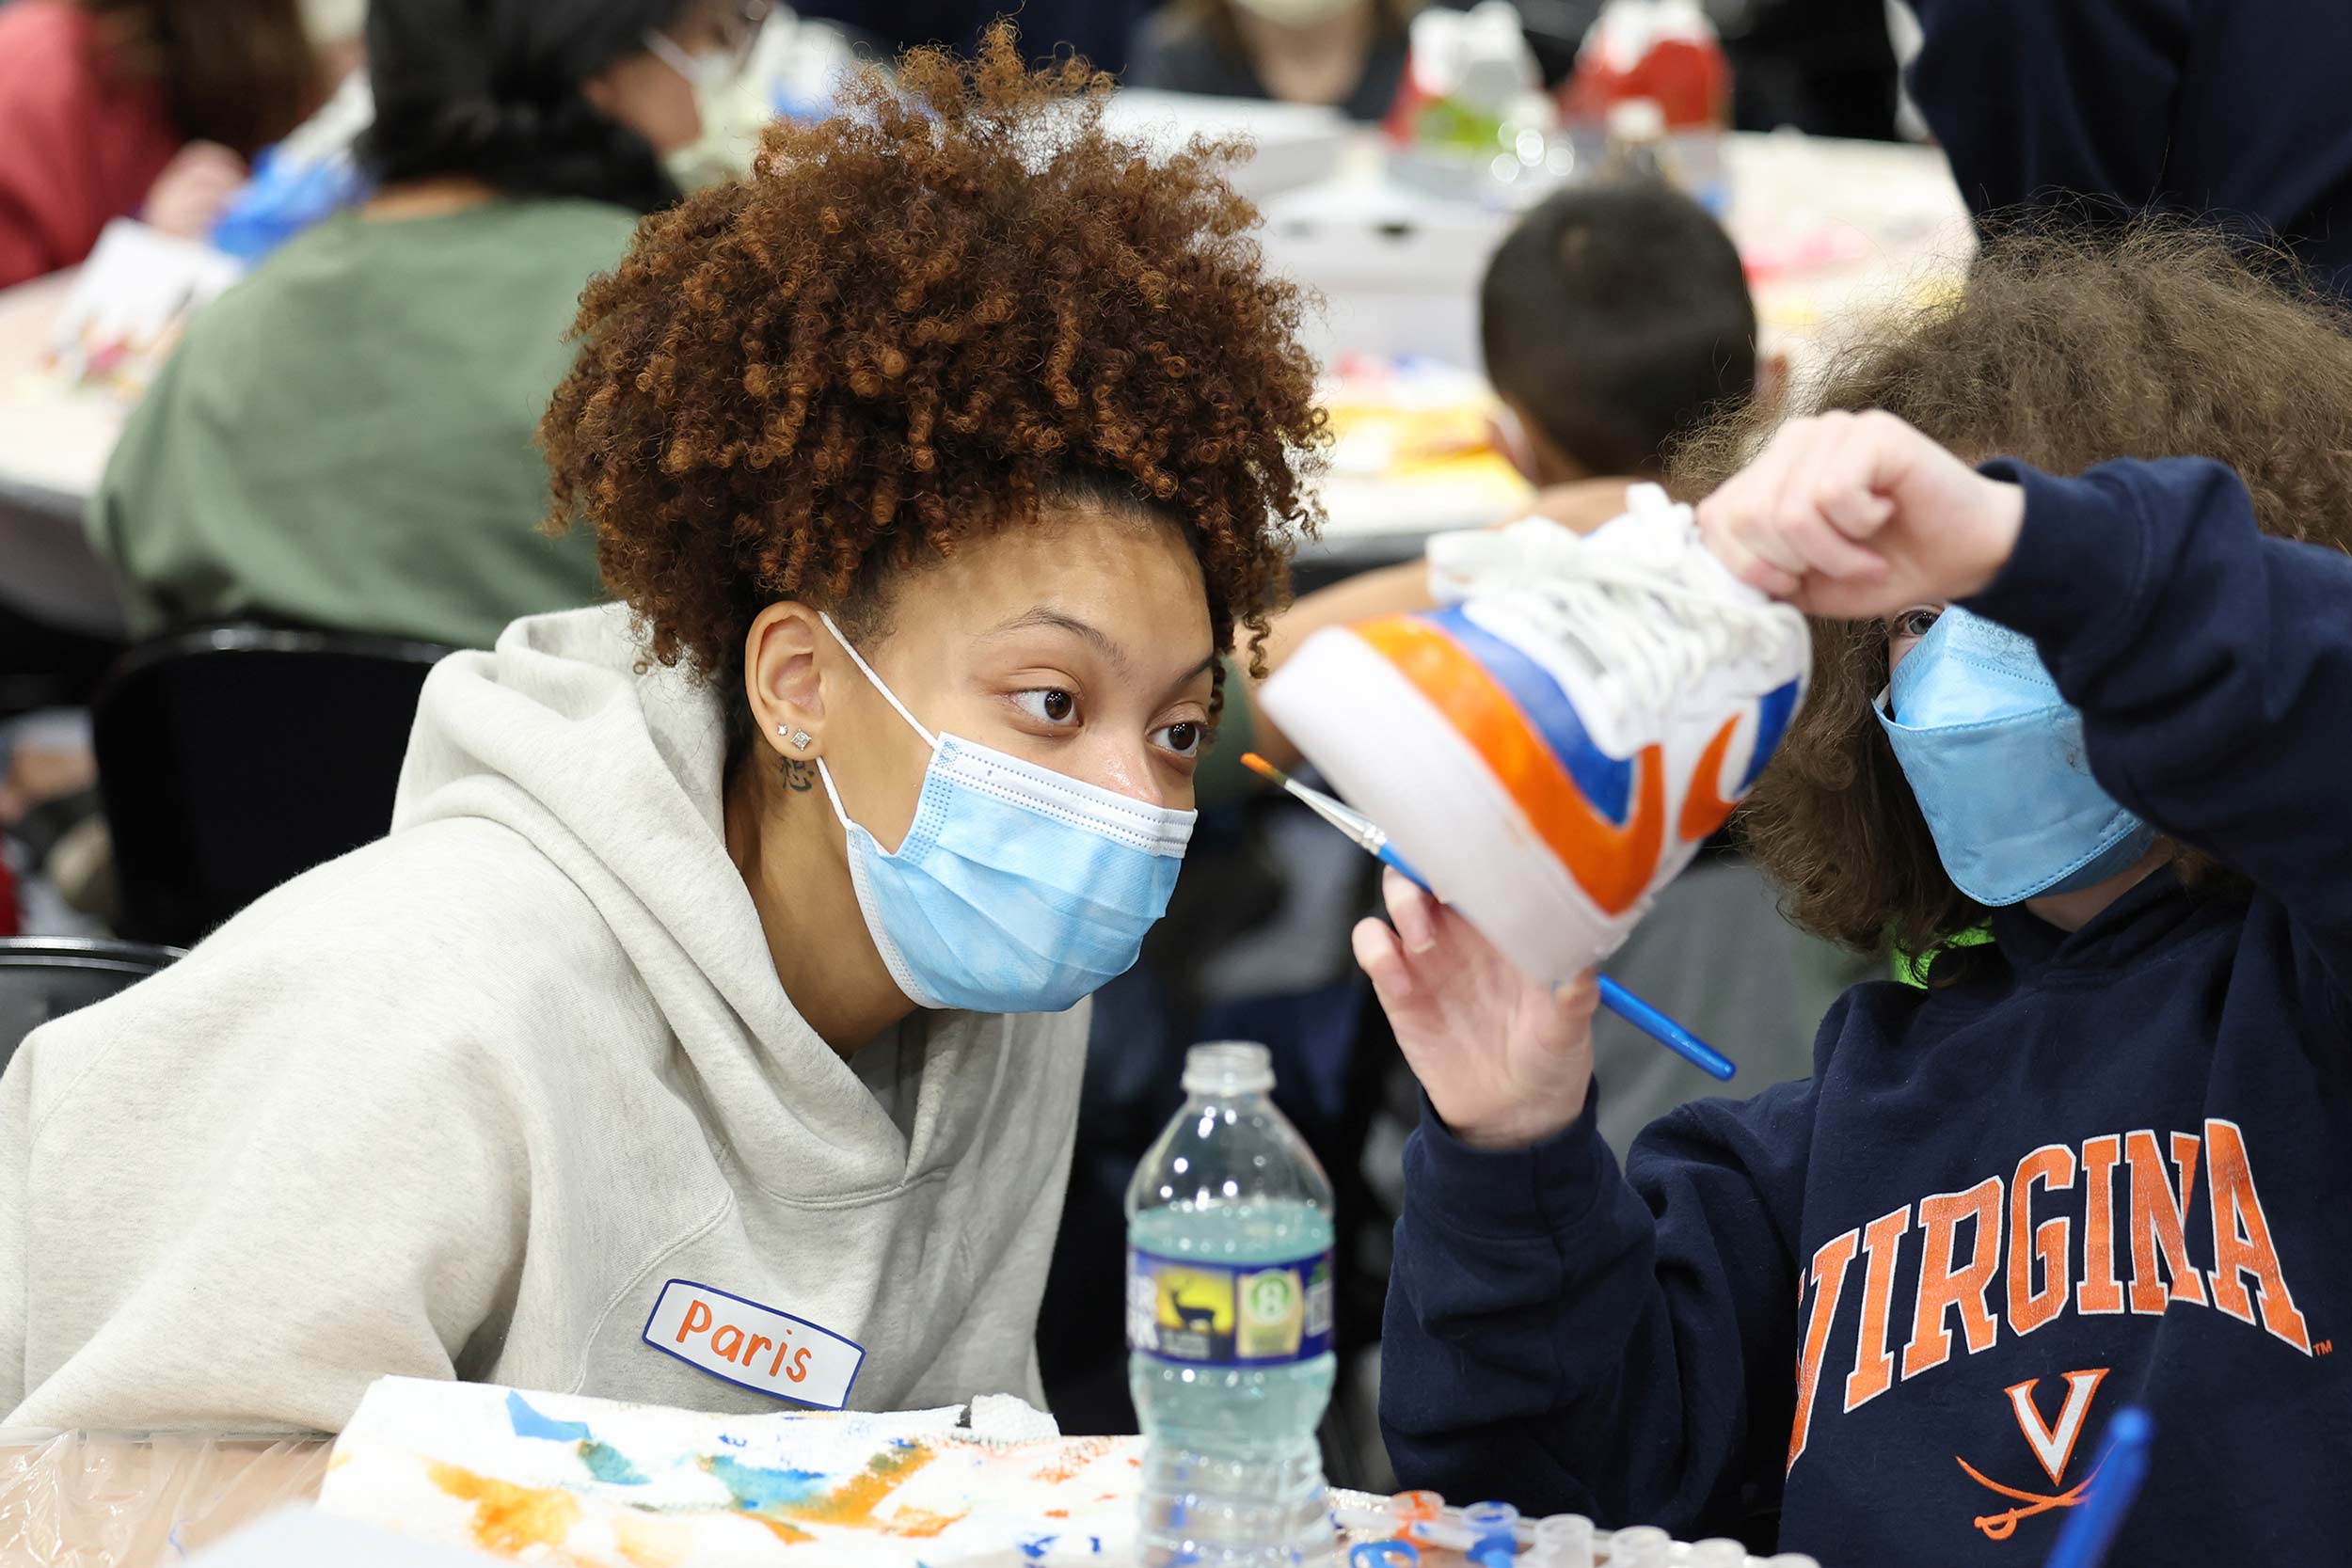 Two students lean in to examine an orange and blue paint job on a shoe